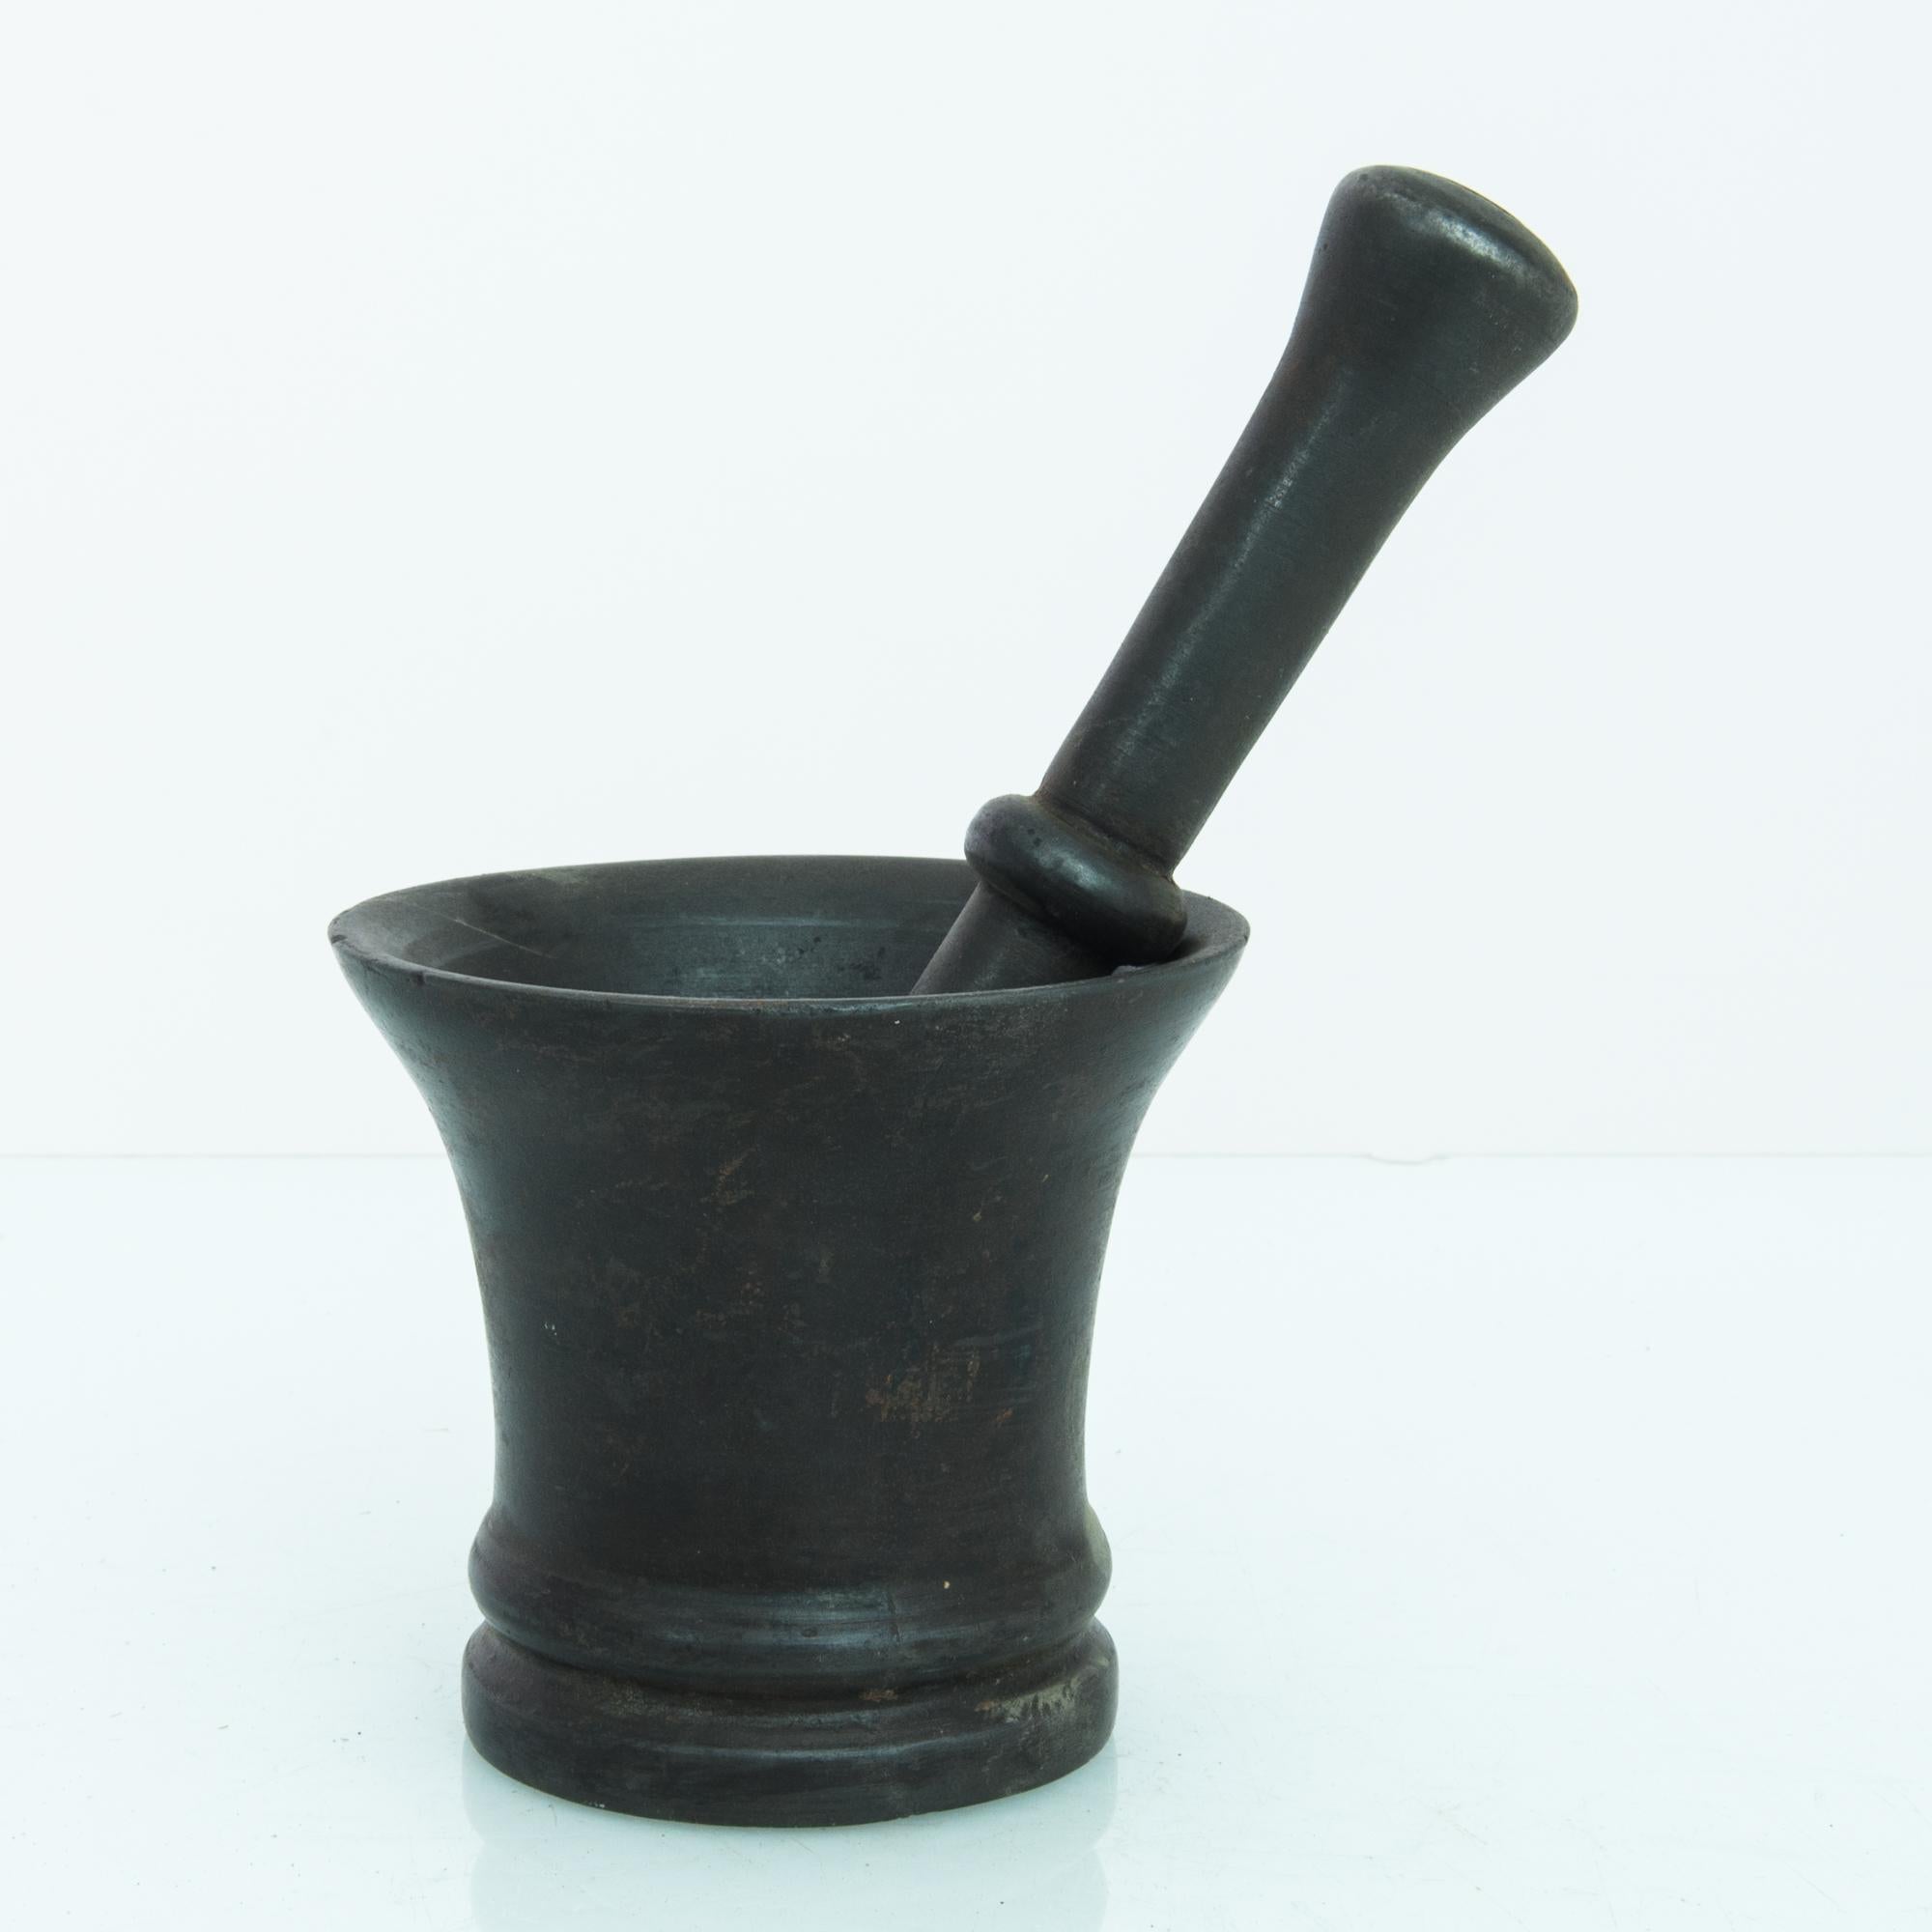 A cast iron mortar and pestle from Belgium, circa 1800. An upturned bell-shape in dark metal, accompanied by a long pestle with softly rounded ends. The surface of the metal has an enigmatic, multi-tonal quality, inflected with shades of indigo and